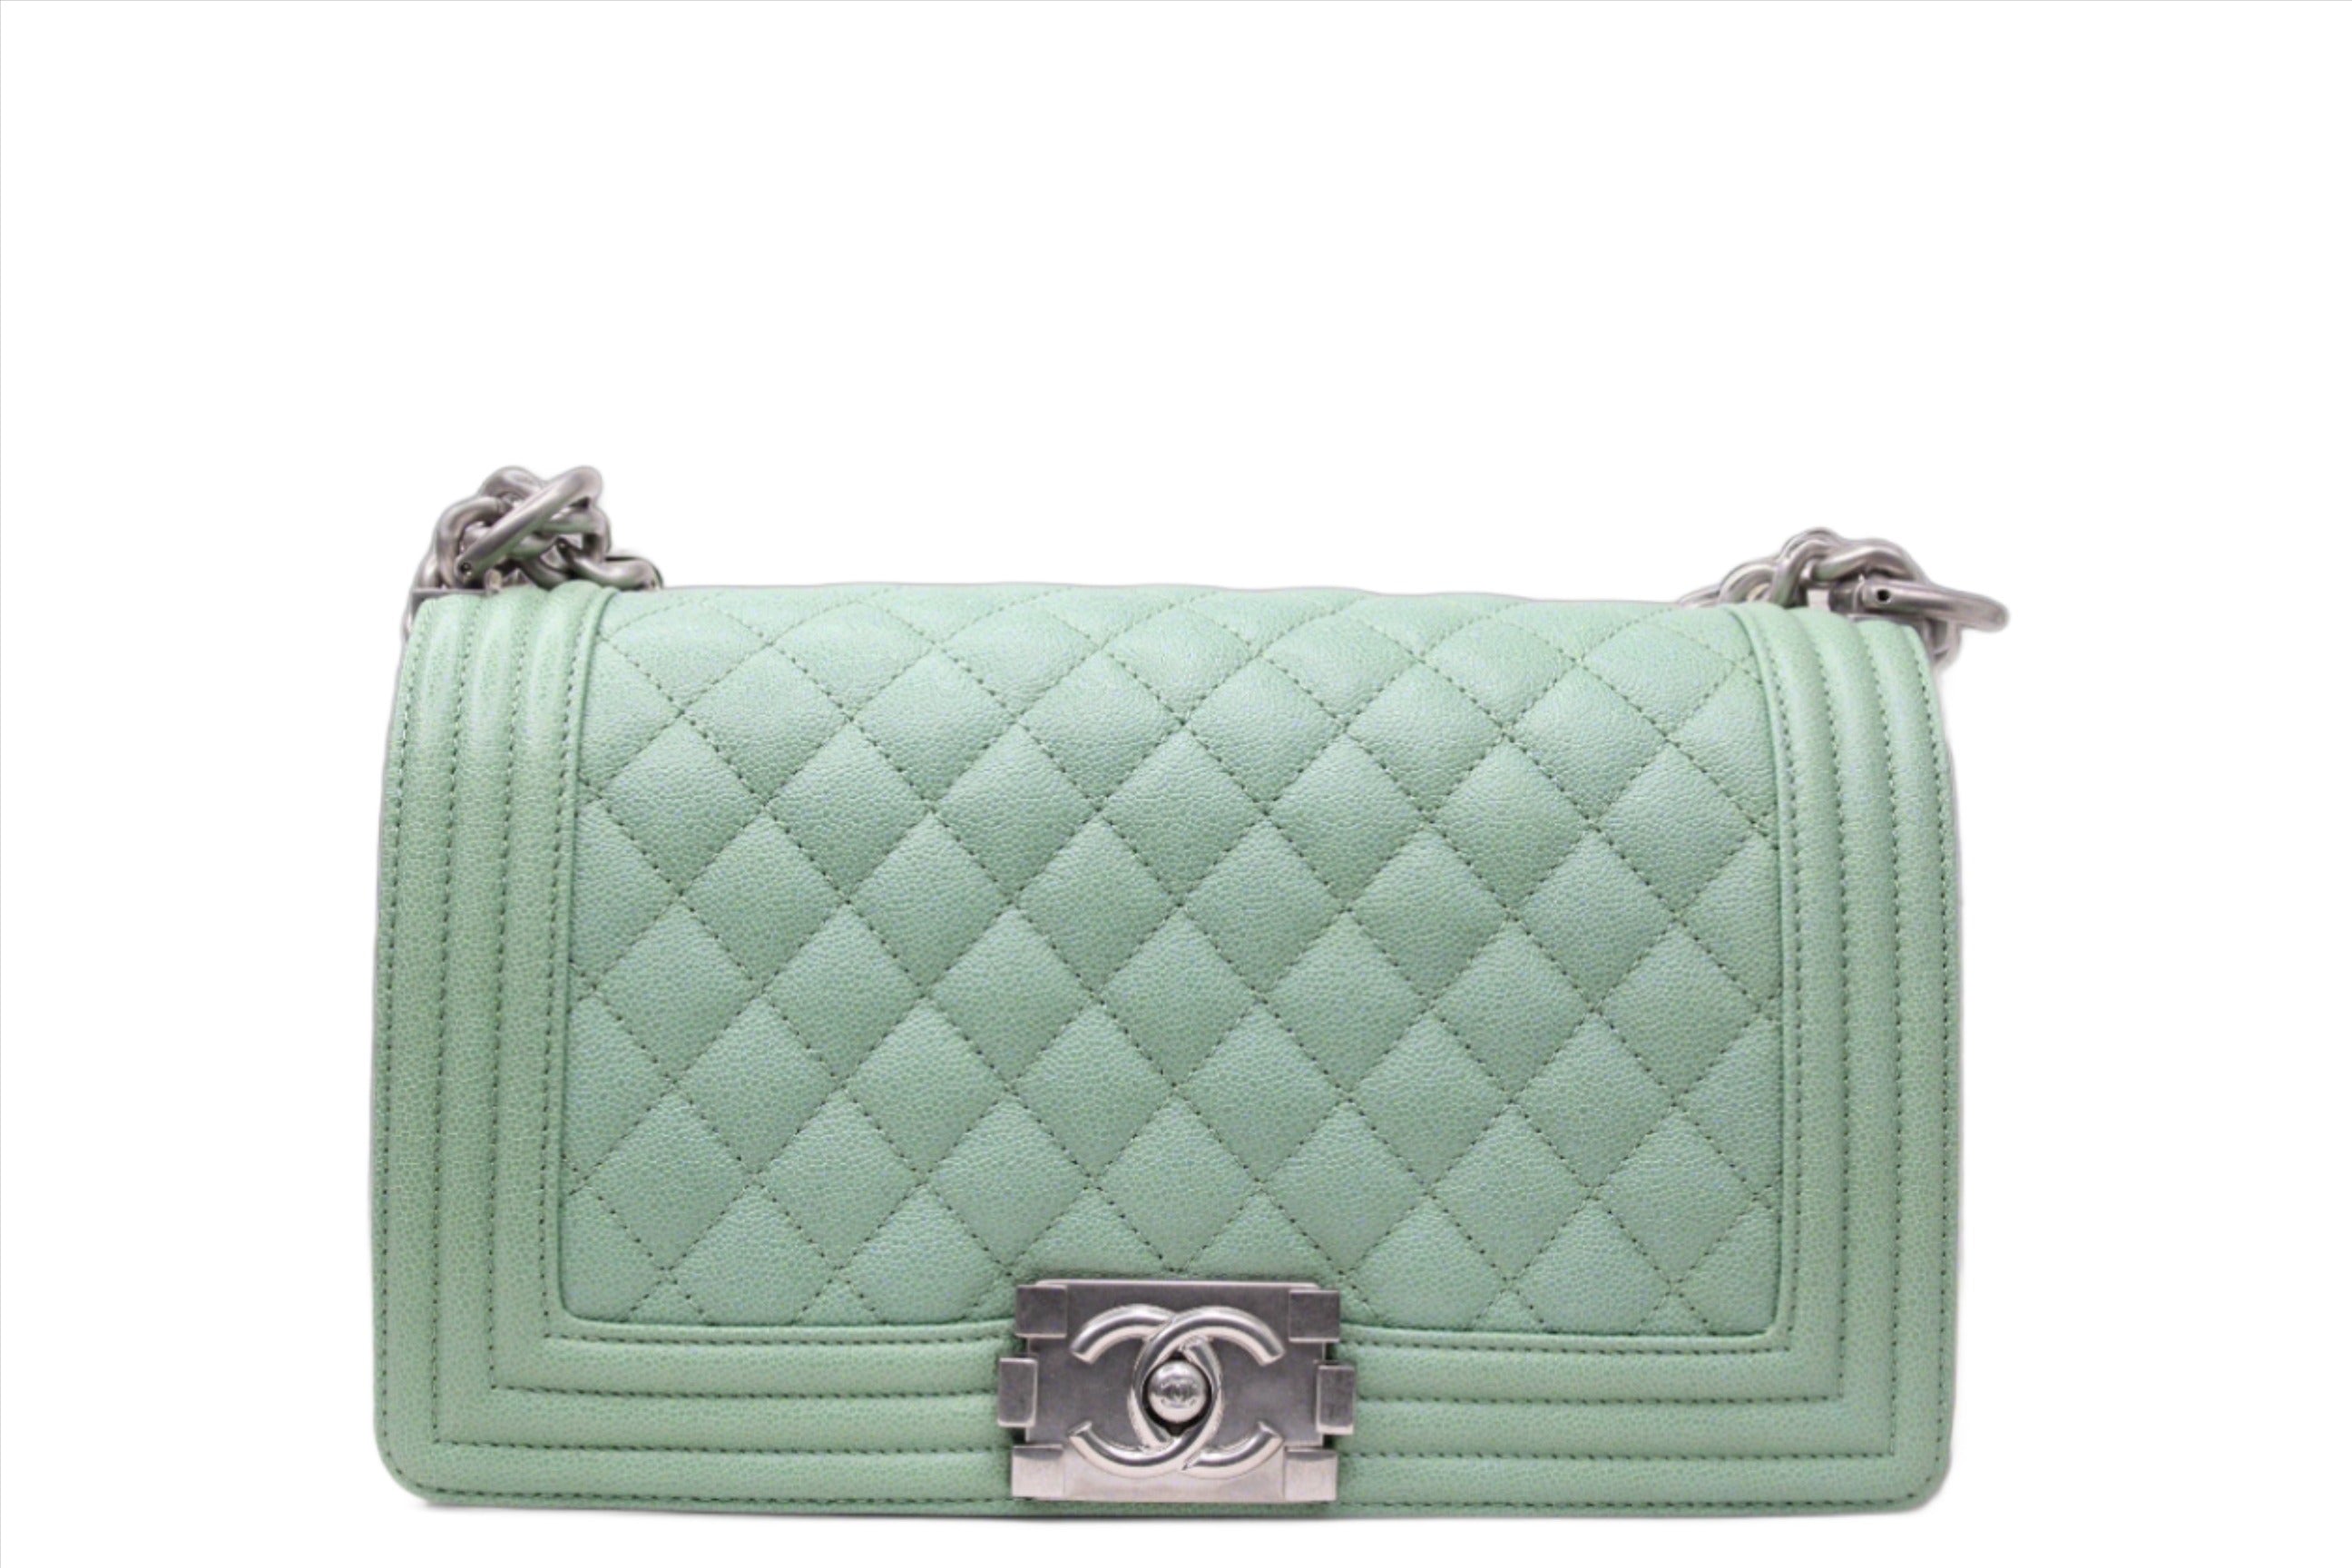 Front of Chanel boy bag finished in mint green caviar